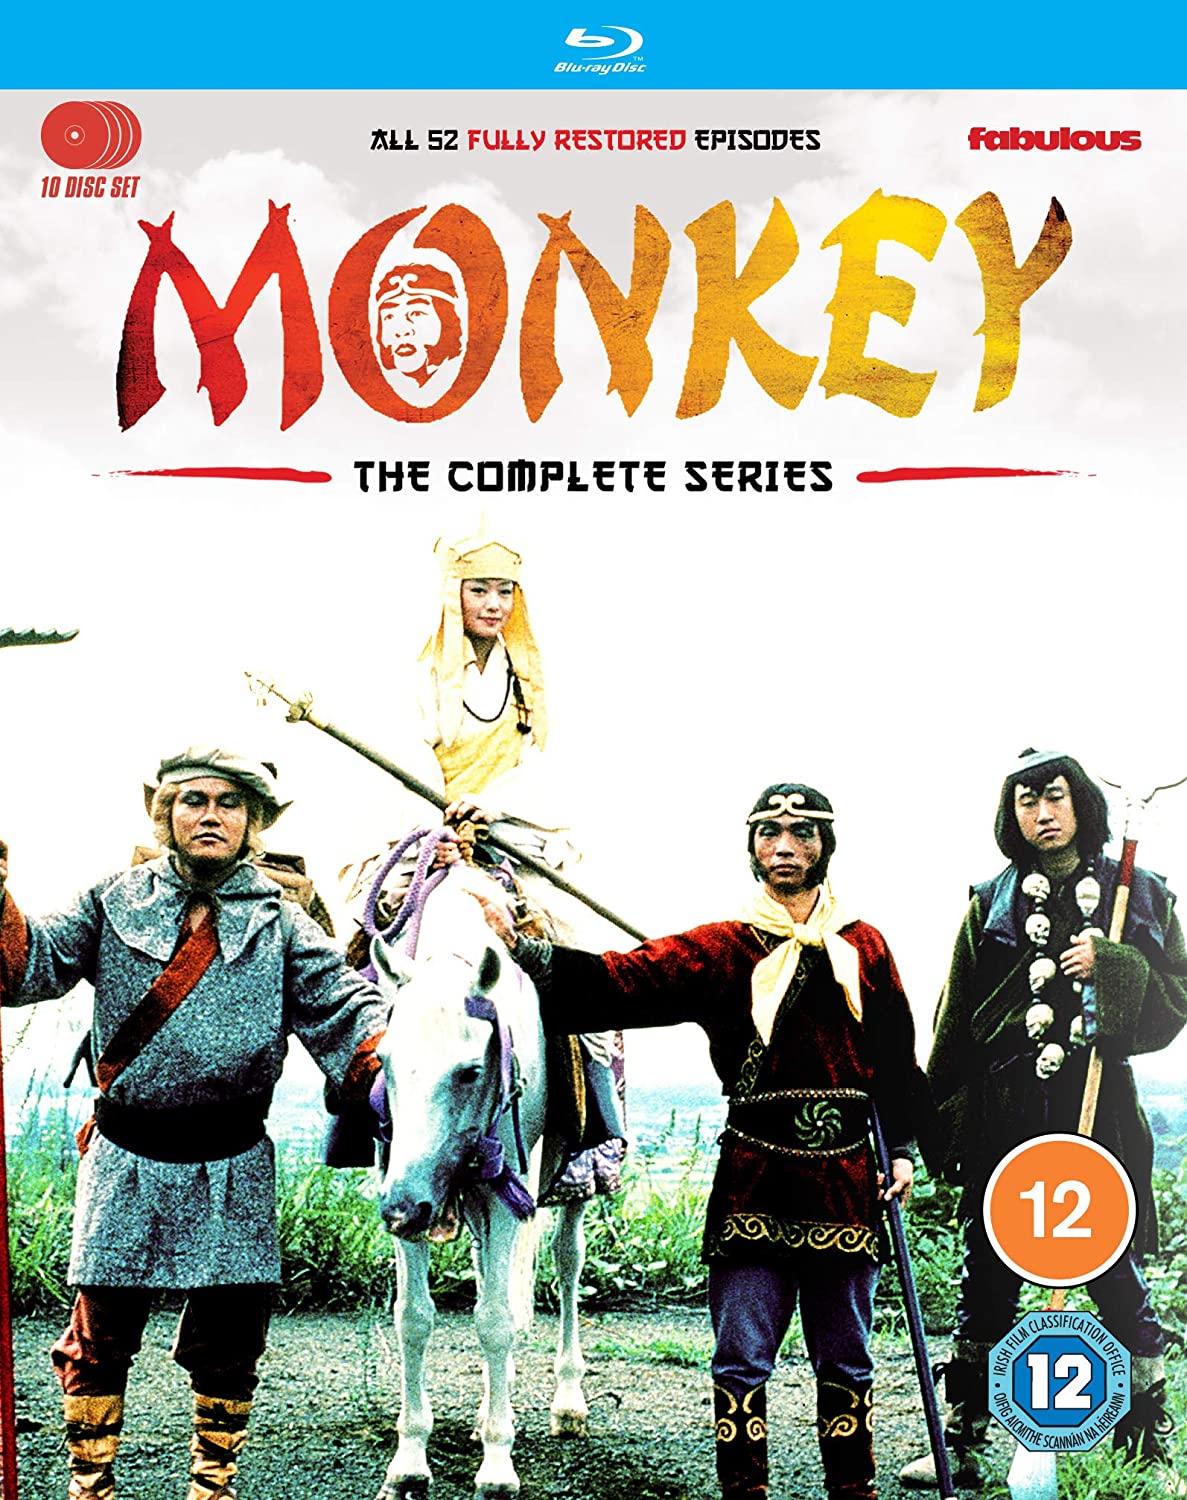 boom competitions -  win Monkey on Blu-ray